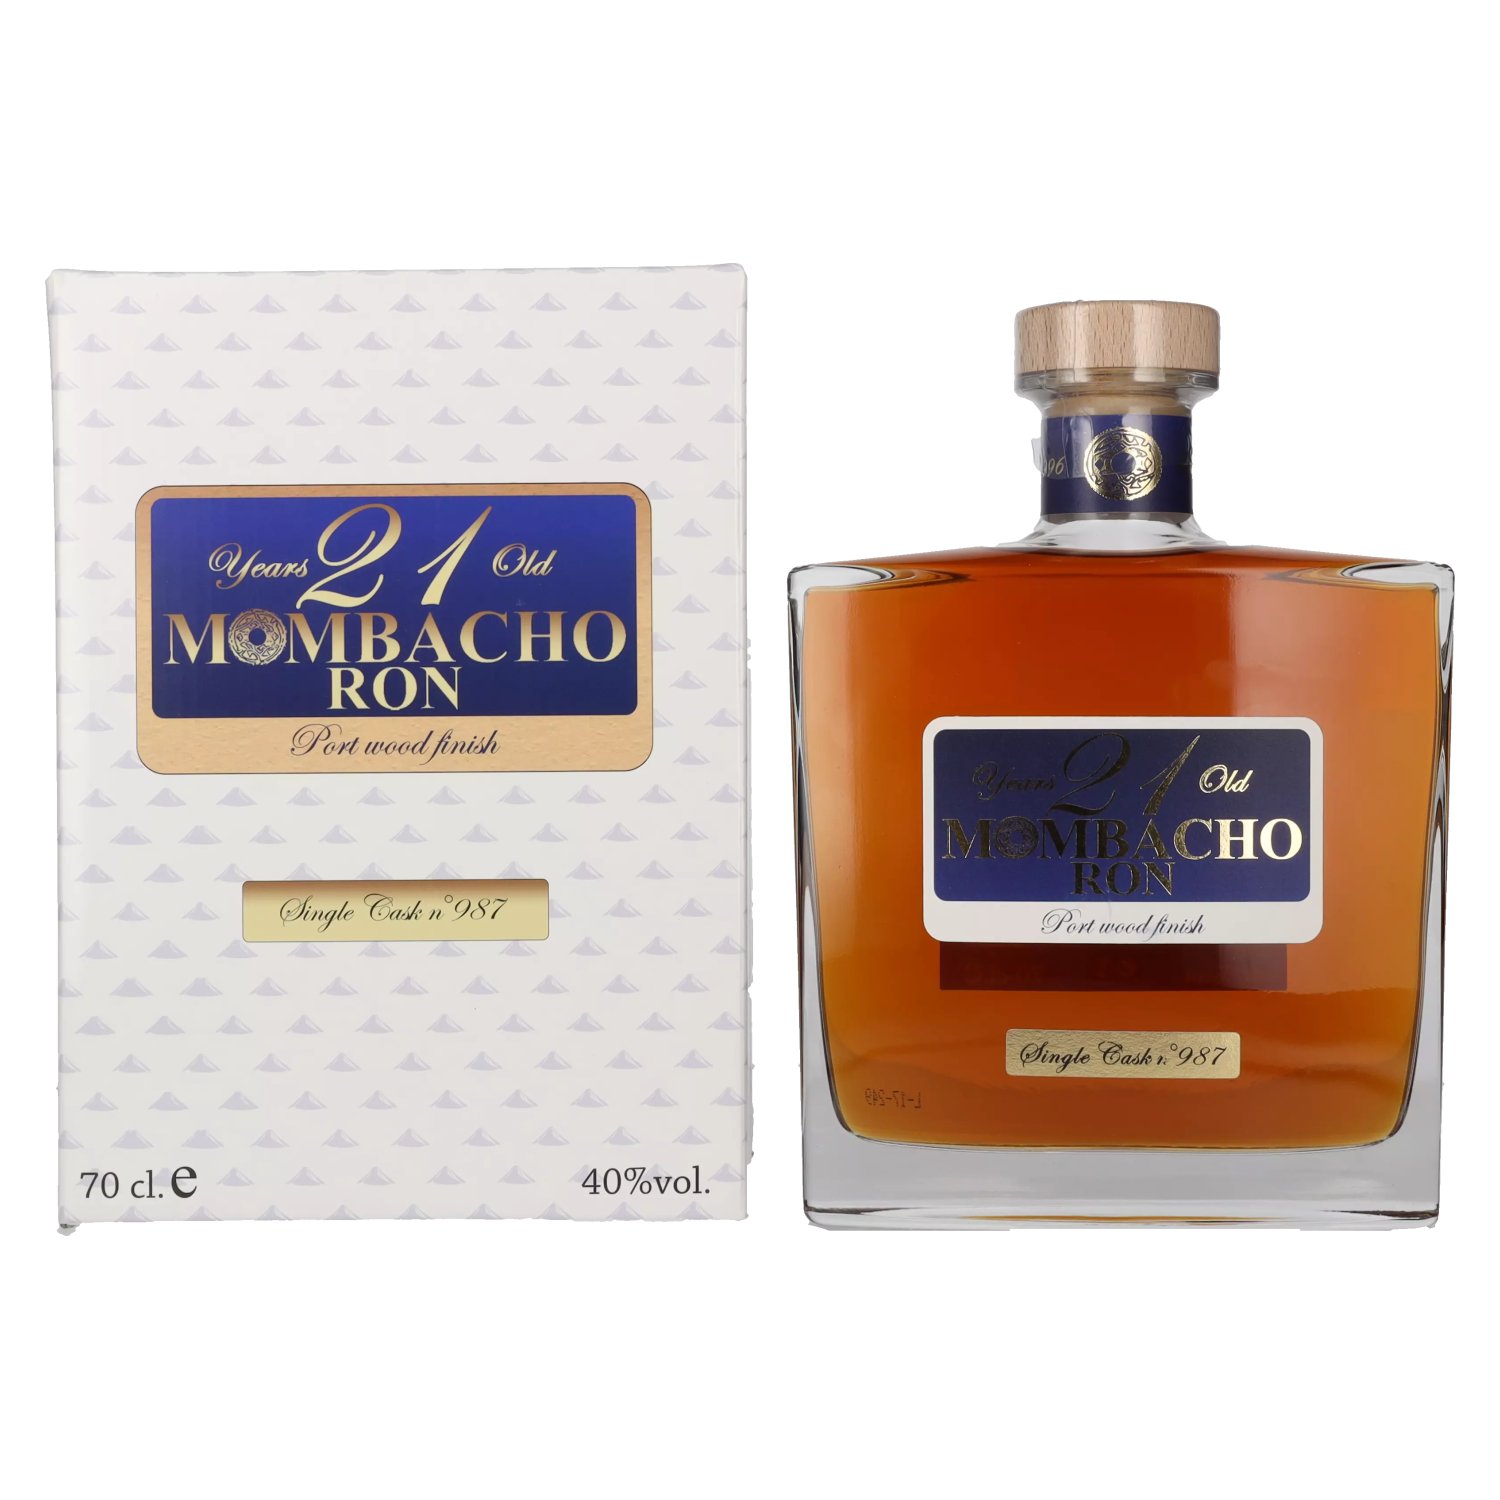 Wood 40% in 0,7l Finish Vol. Ron Port Old Years Giftbox Mombacho 21